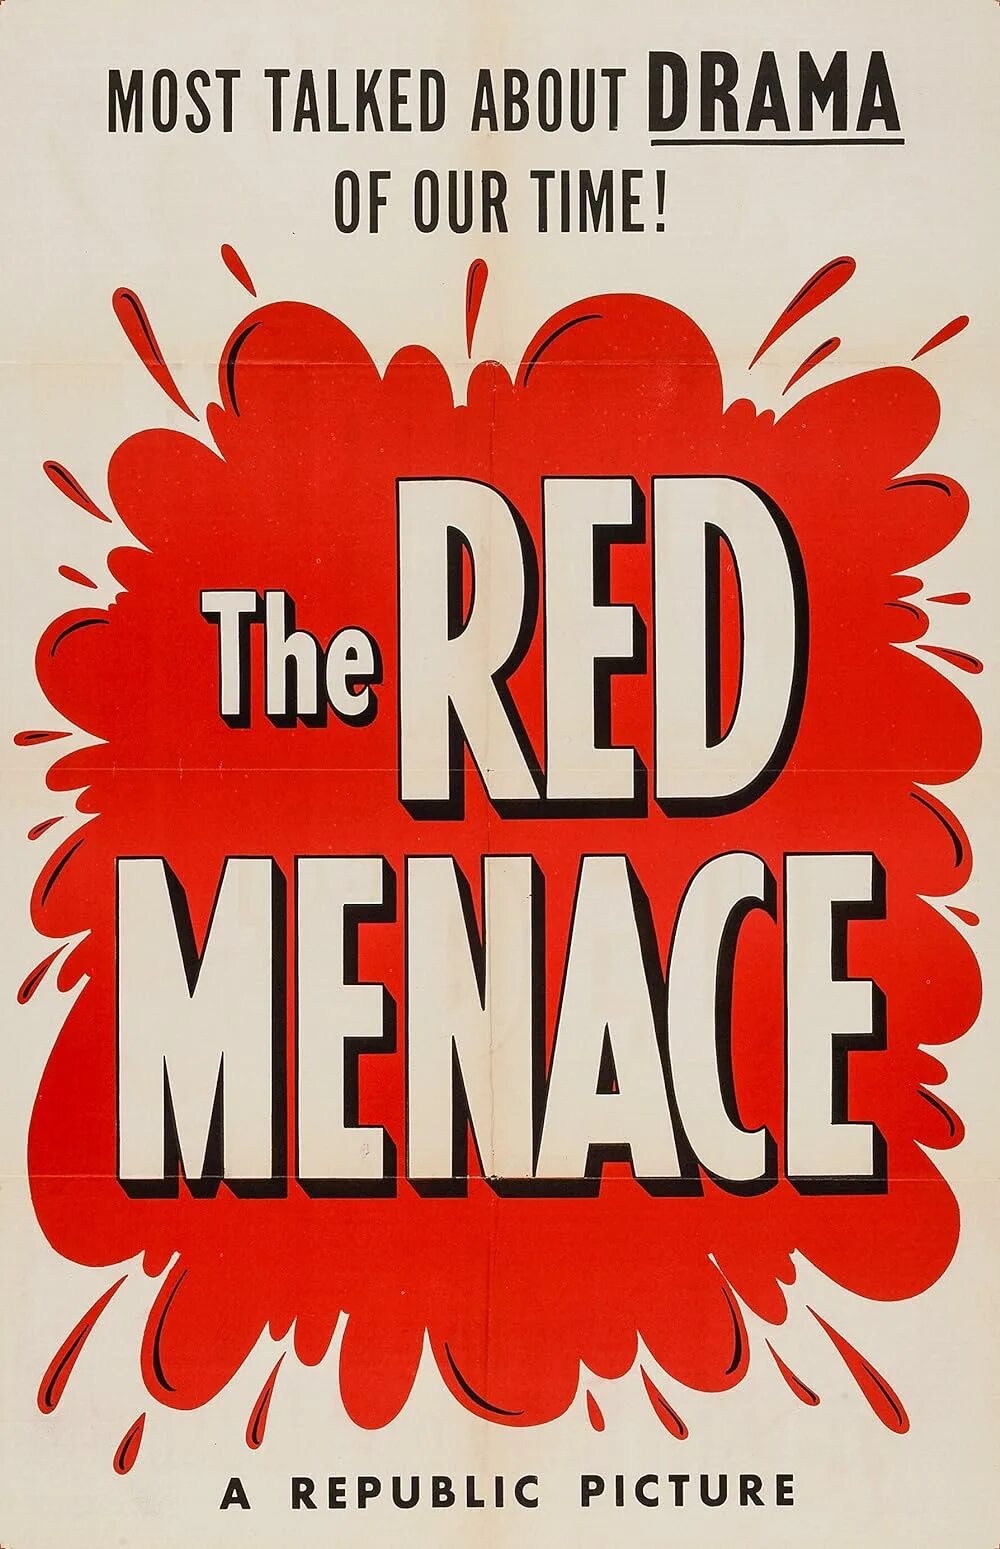 Red scare. Red Menace. Red.